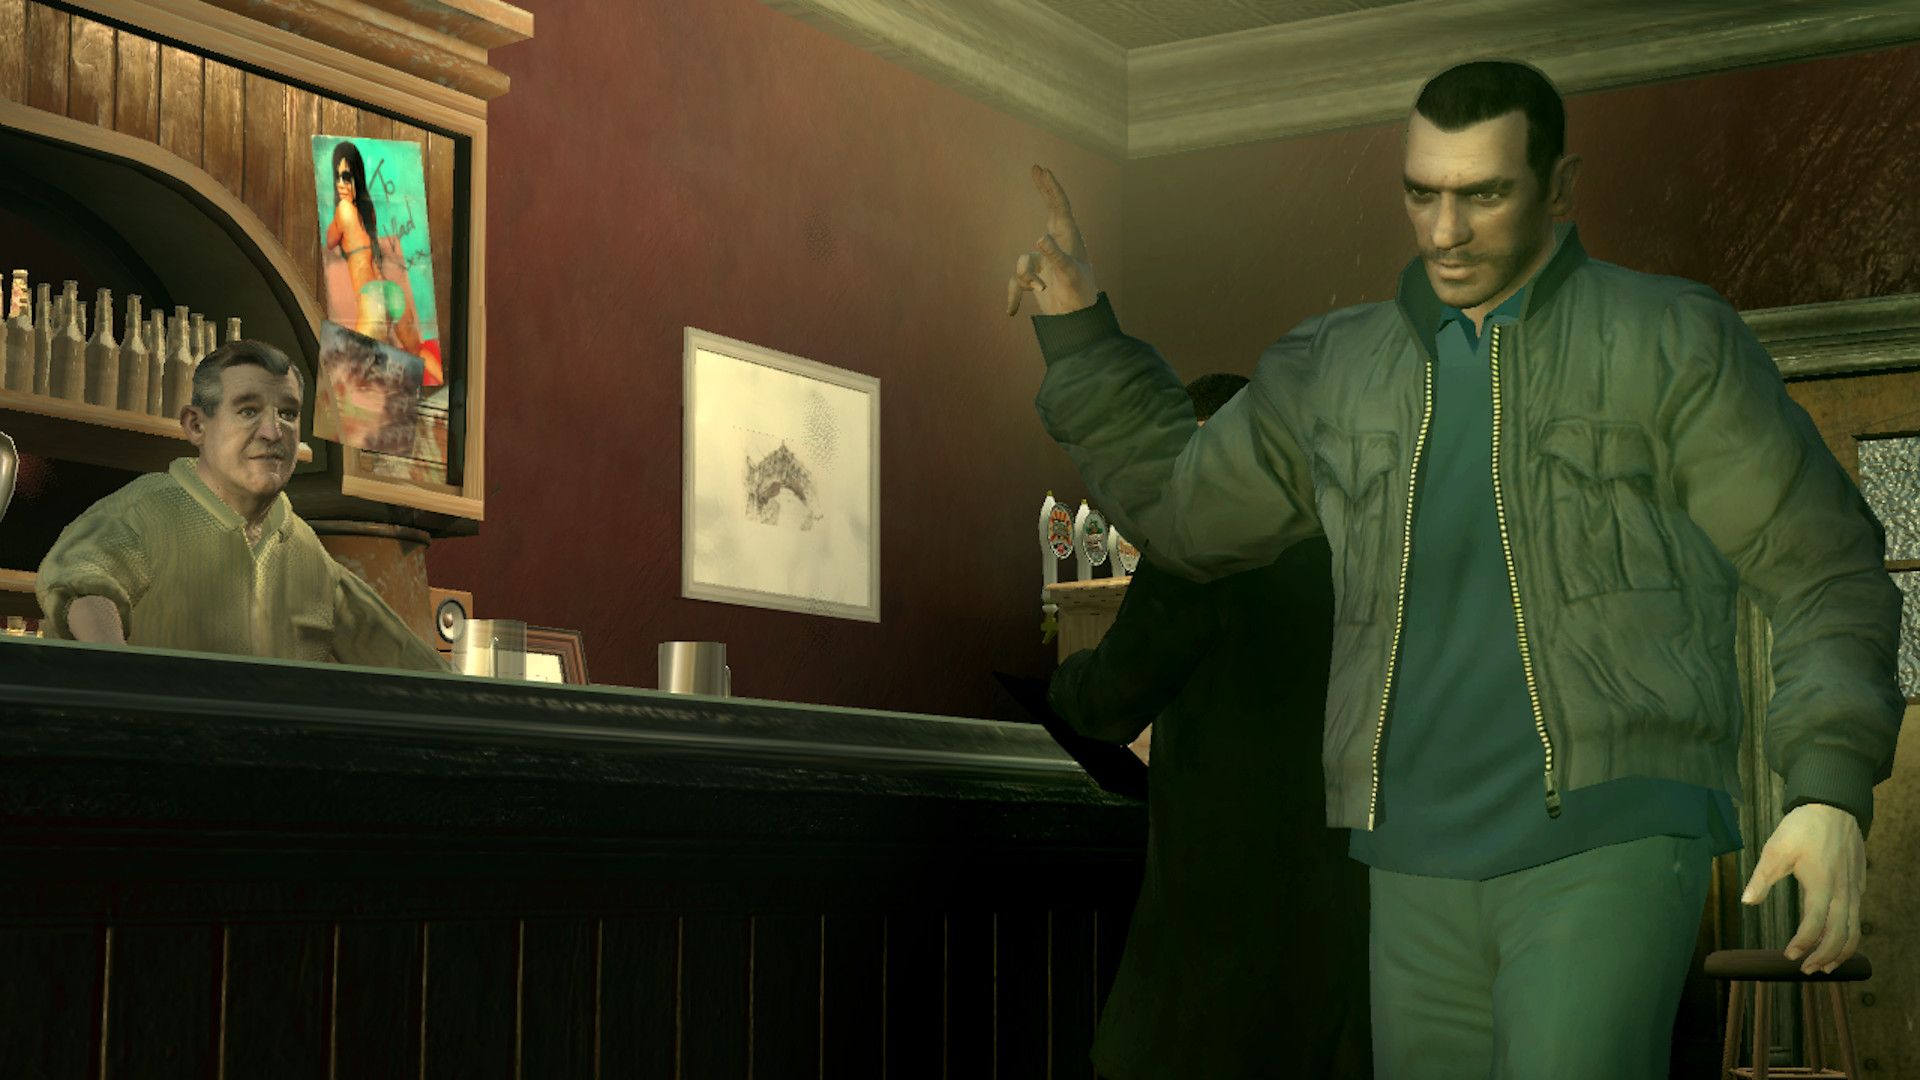 helpen bijtend trimmen GTA 4 cheats: weapons, vehicles, armour, health, and more | The Loadout